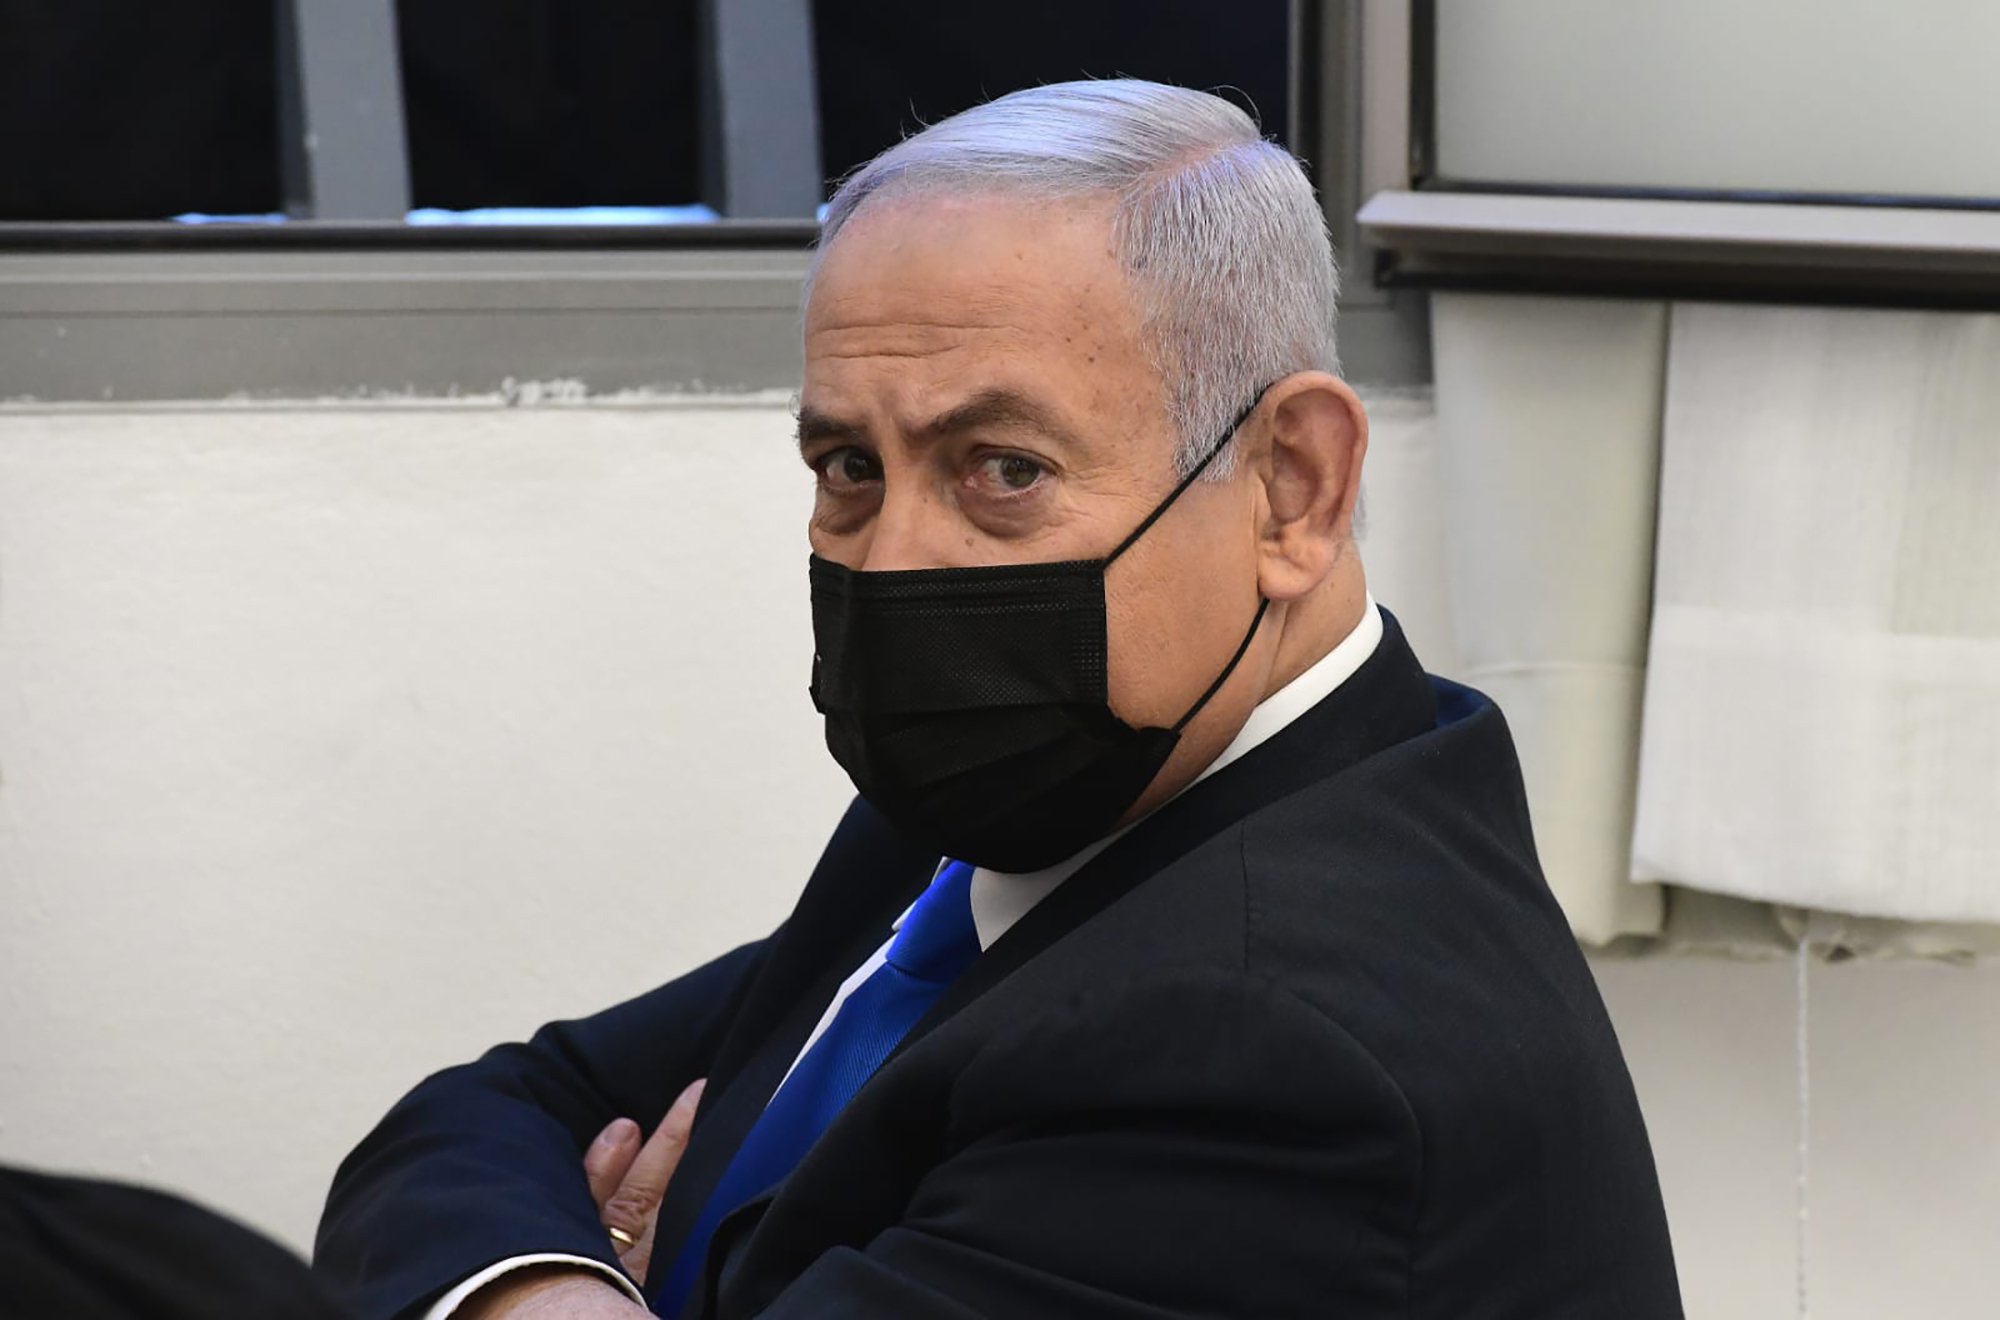 The Israeli prime minister pleads not guilty as the corruption process resumes